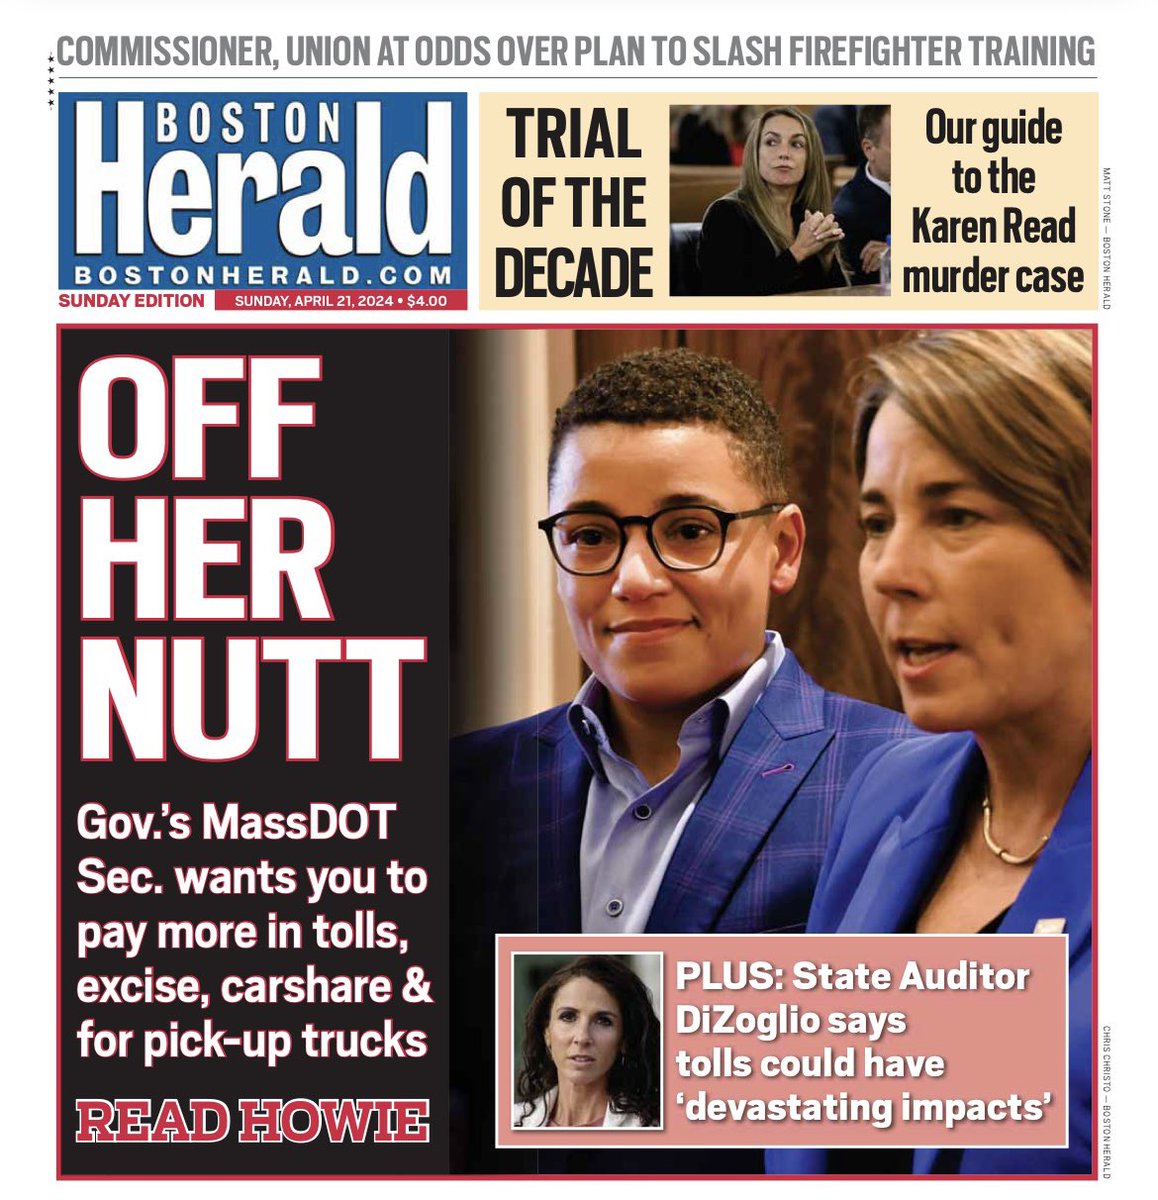 Today’s cover story in the @BostonHerald. #mapoli